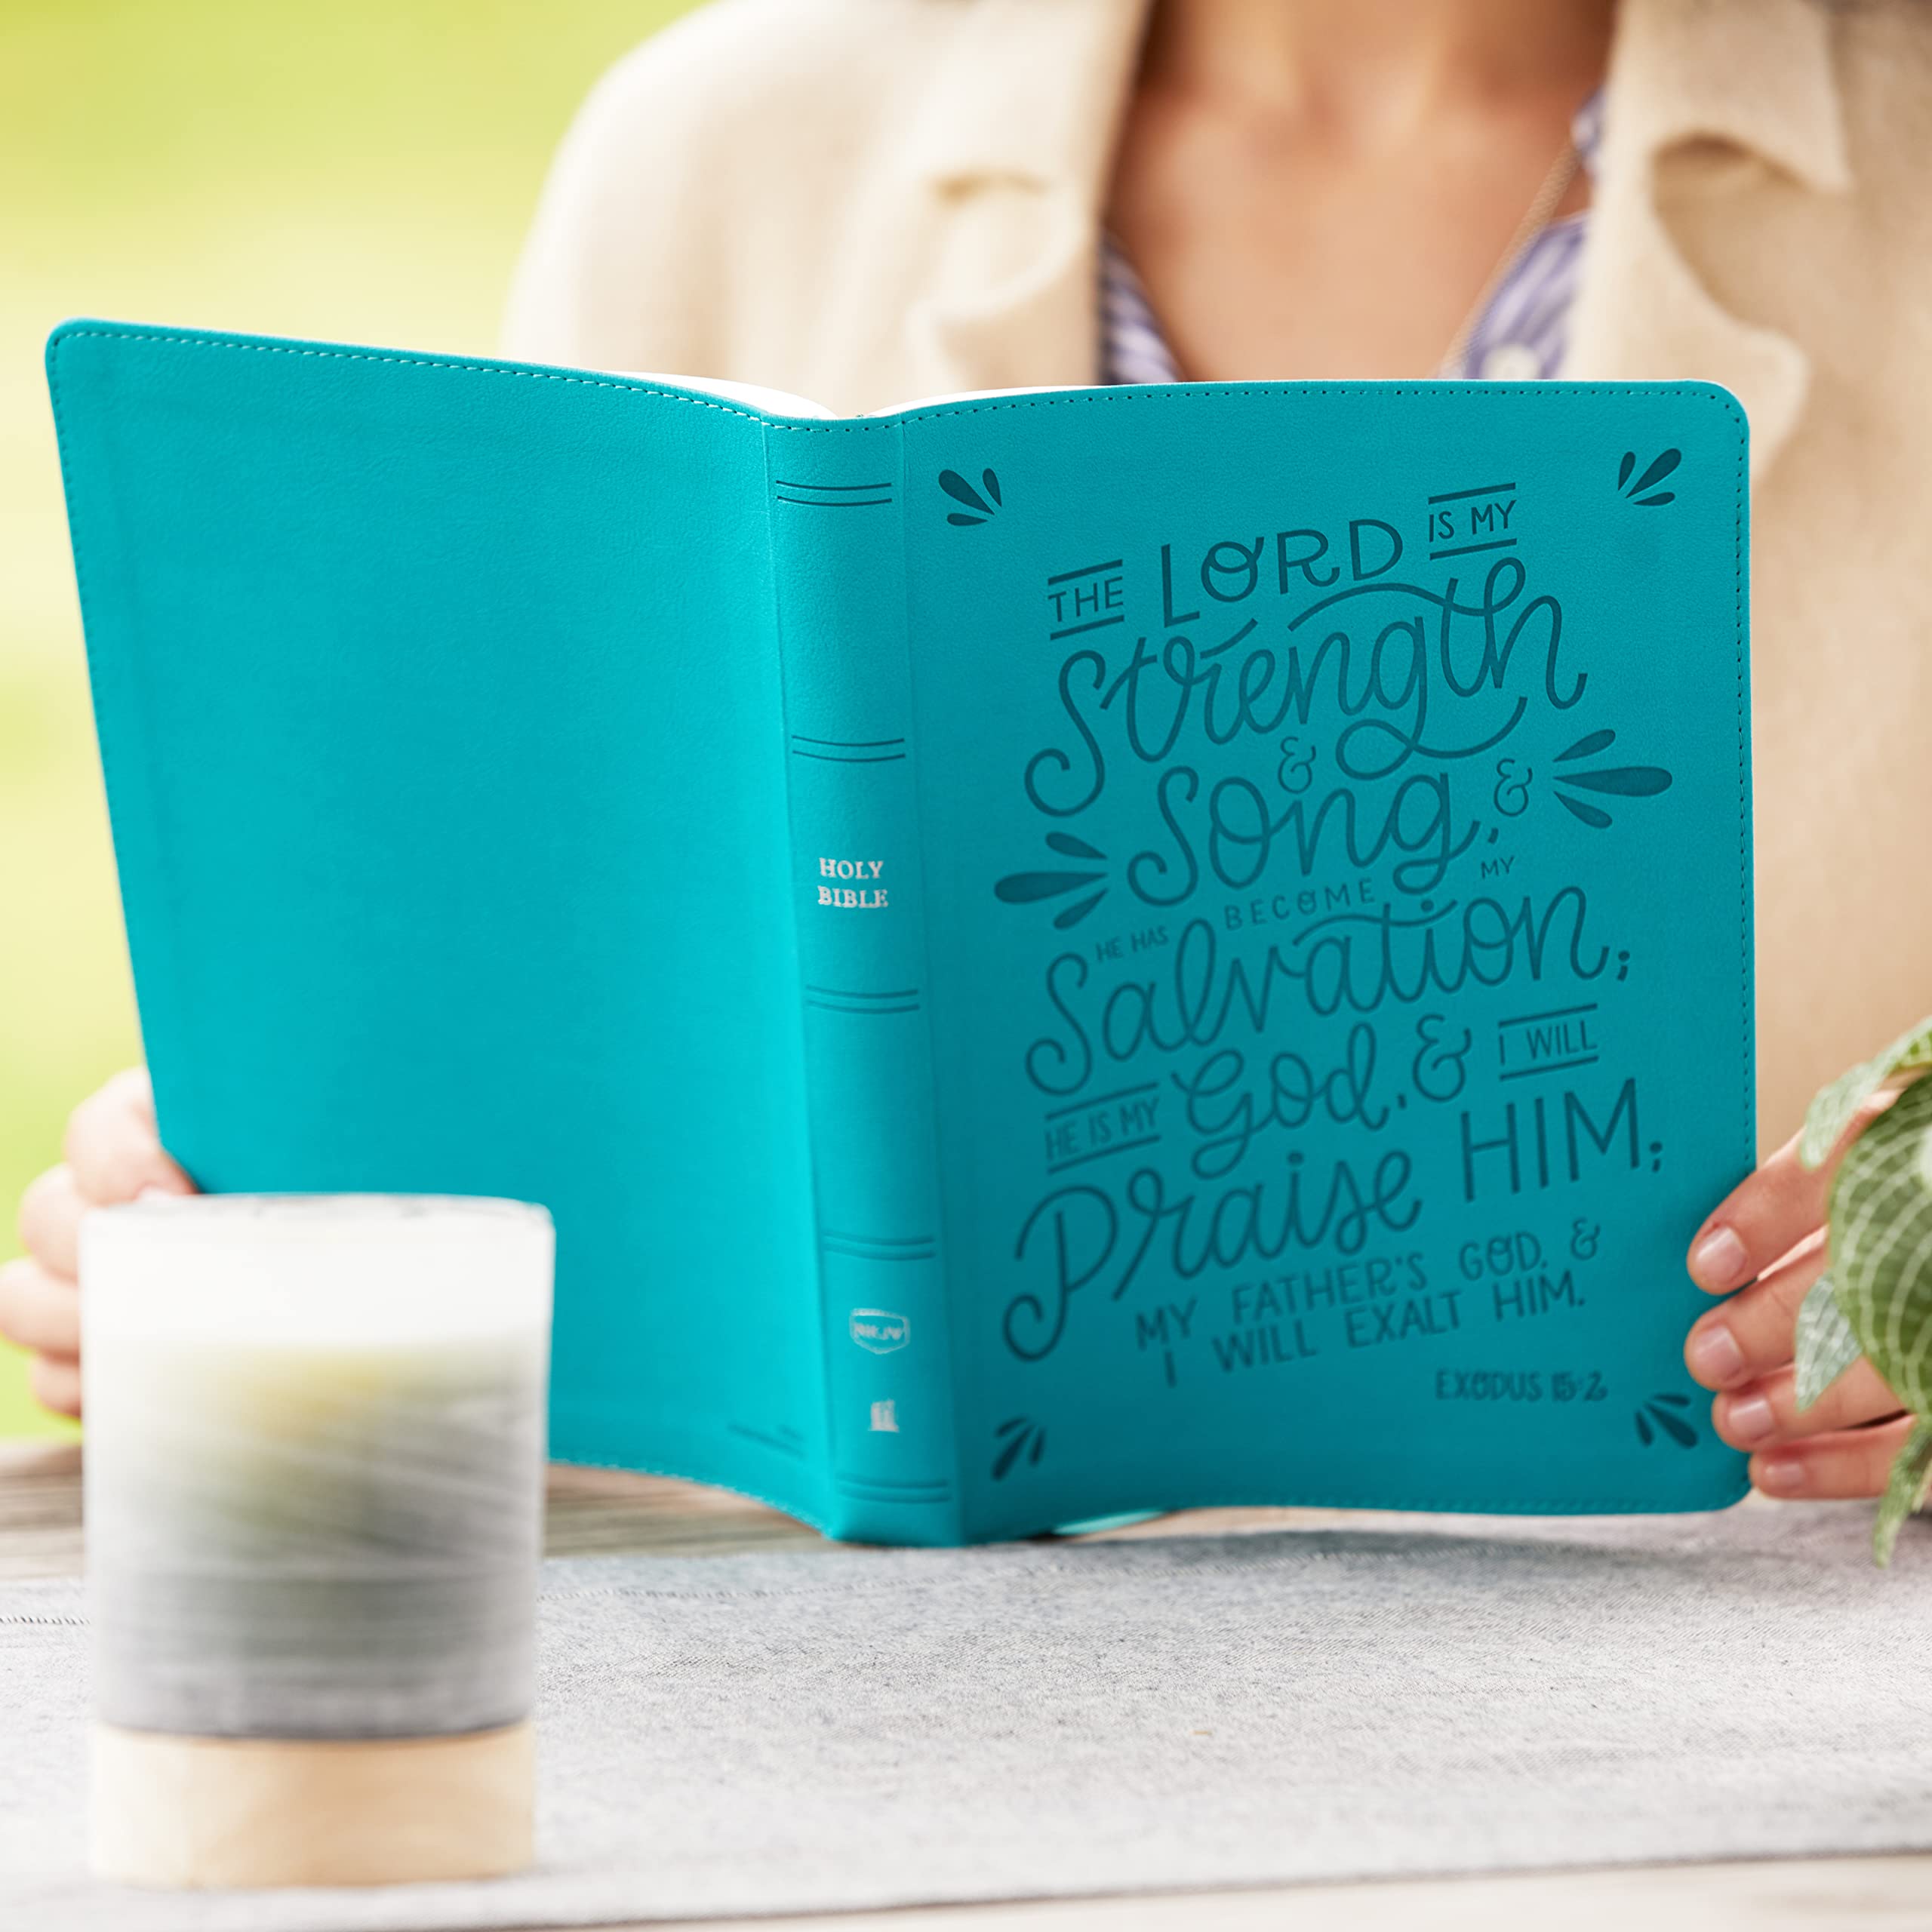 NKJV, Thinline Bible, Verse Art Cover Collection, Leathersoft, Teal, Red Letter, Comfort Print: Holy Bible, New King James Version